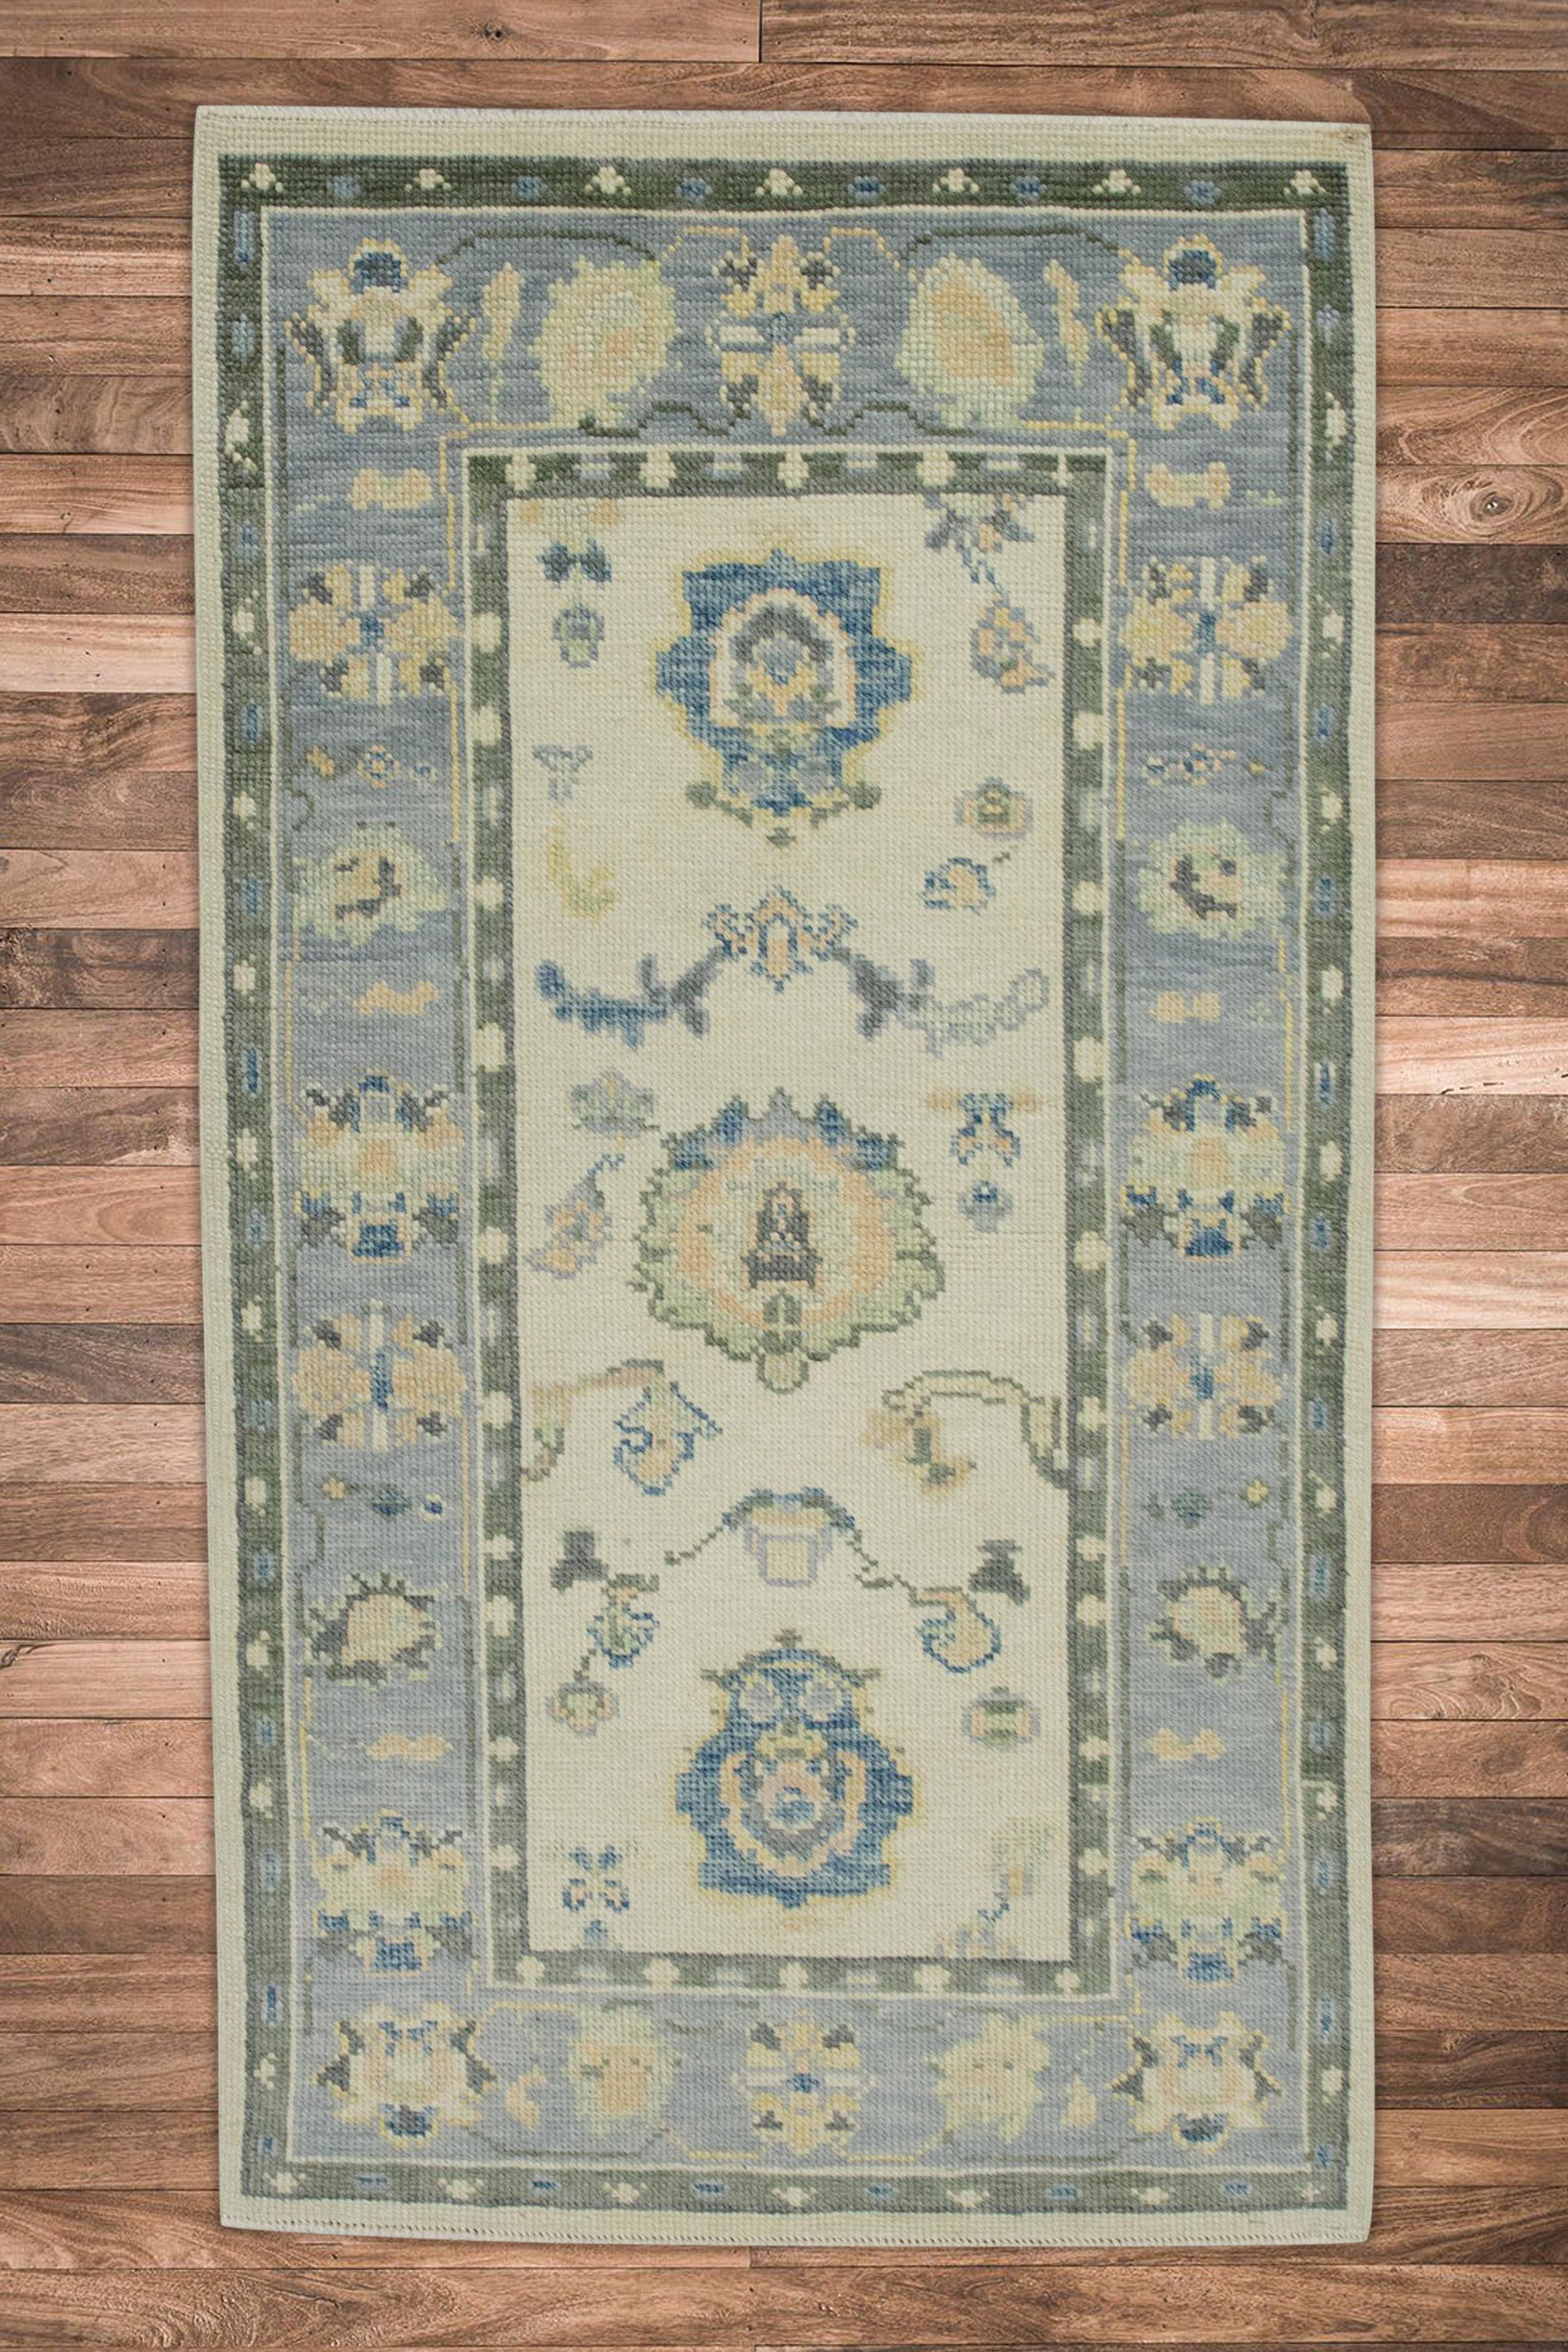 Contemporary Green & Blue Floral Design Handwoven Wool Turkish Oushak Rug 2'10